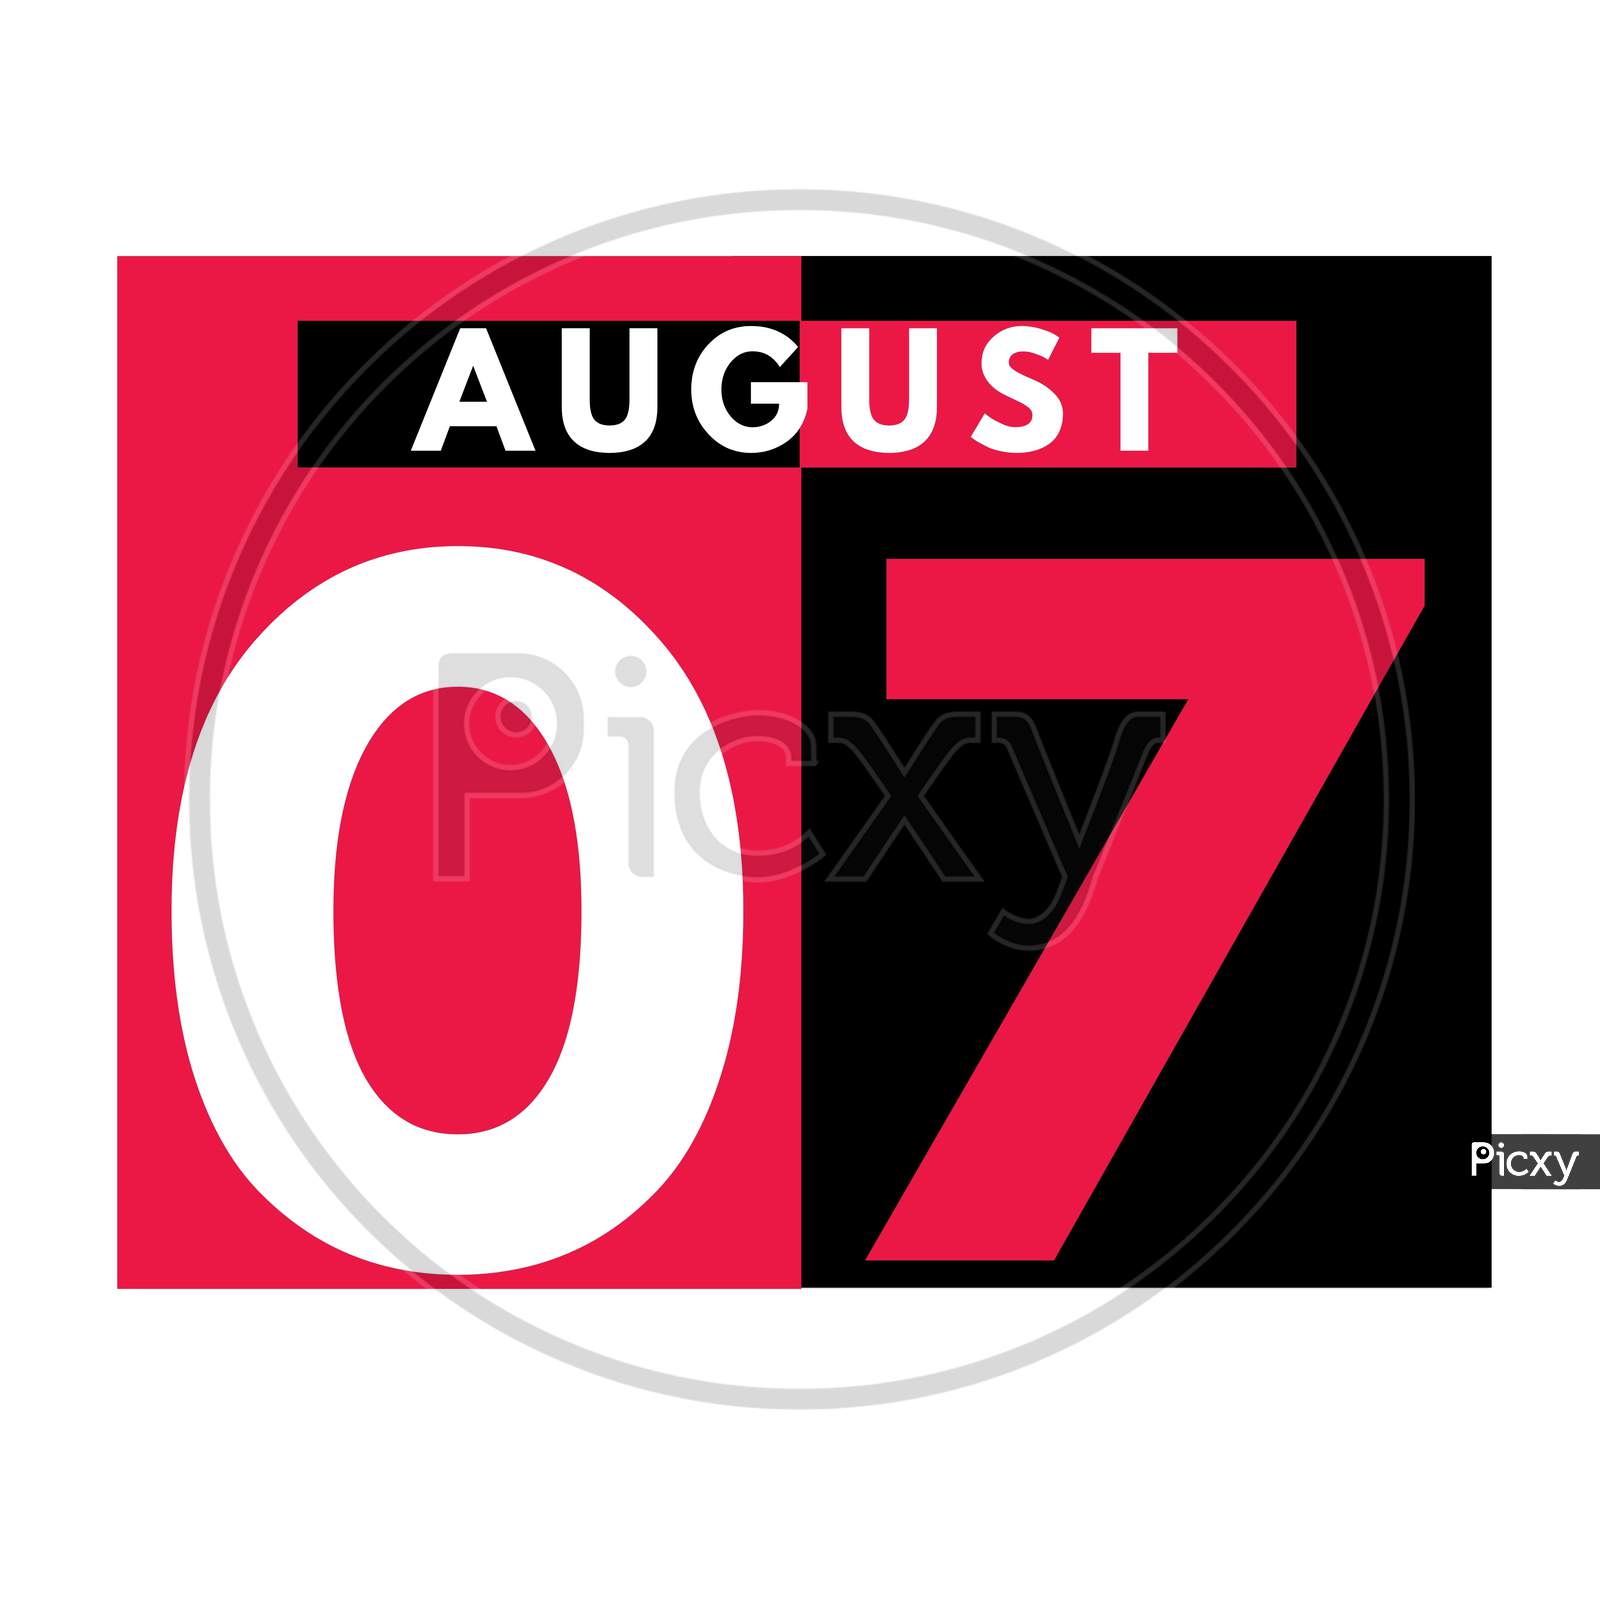 August 7 . Modern Daily Calendar Icon .Date ,Day, Month .Calendar For The Month Of August